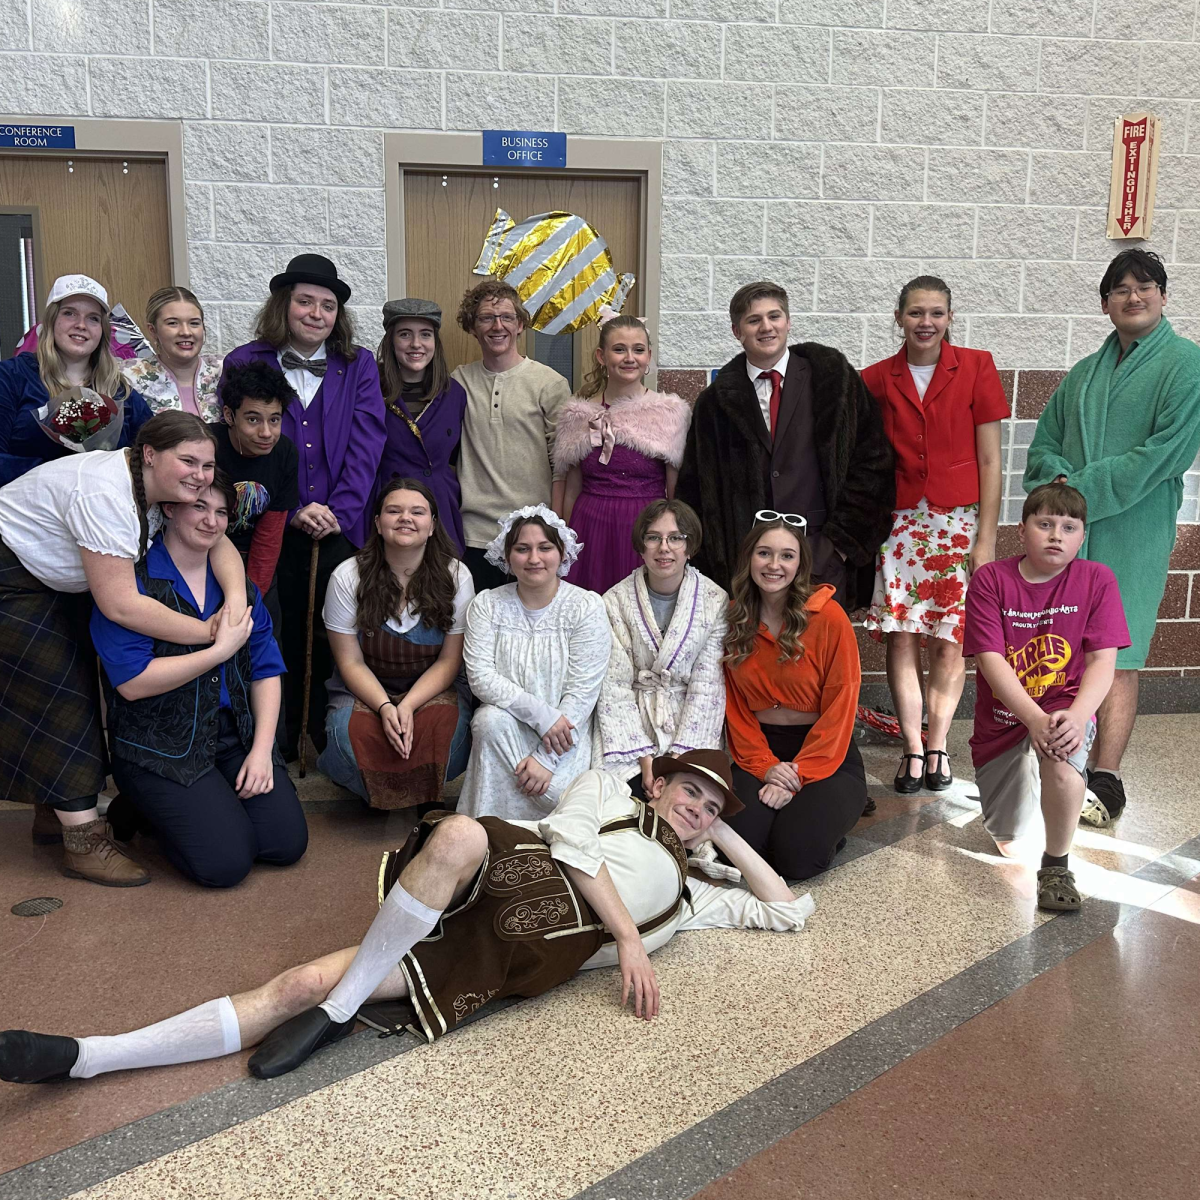 Cast photo including the five graduating seniors from the performance of Charlie and the Chocolate Factory.